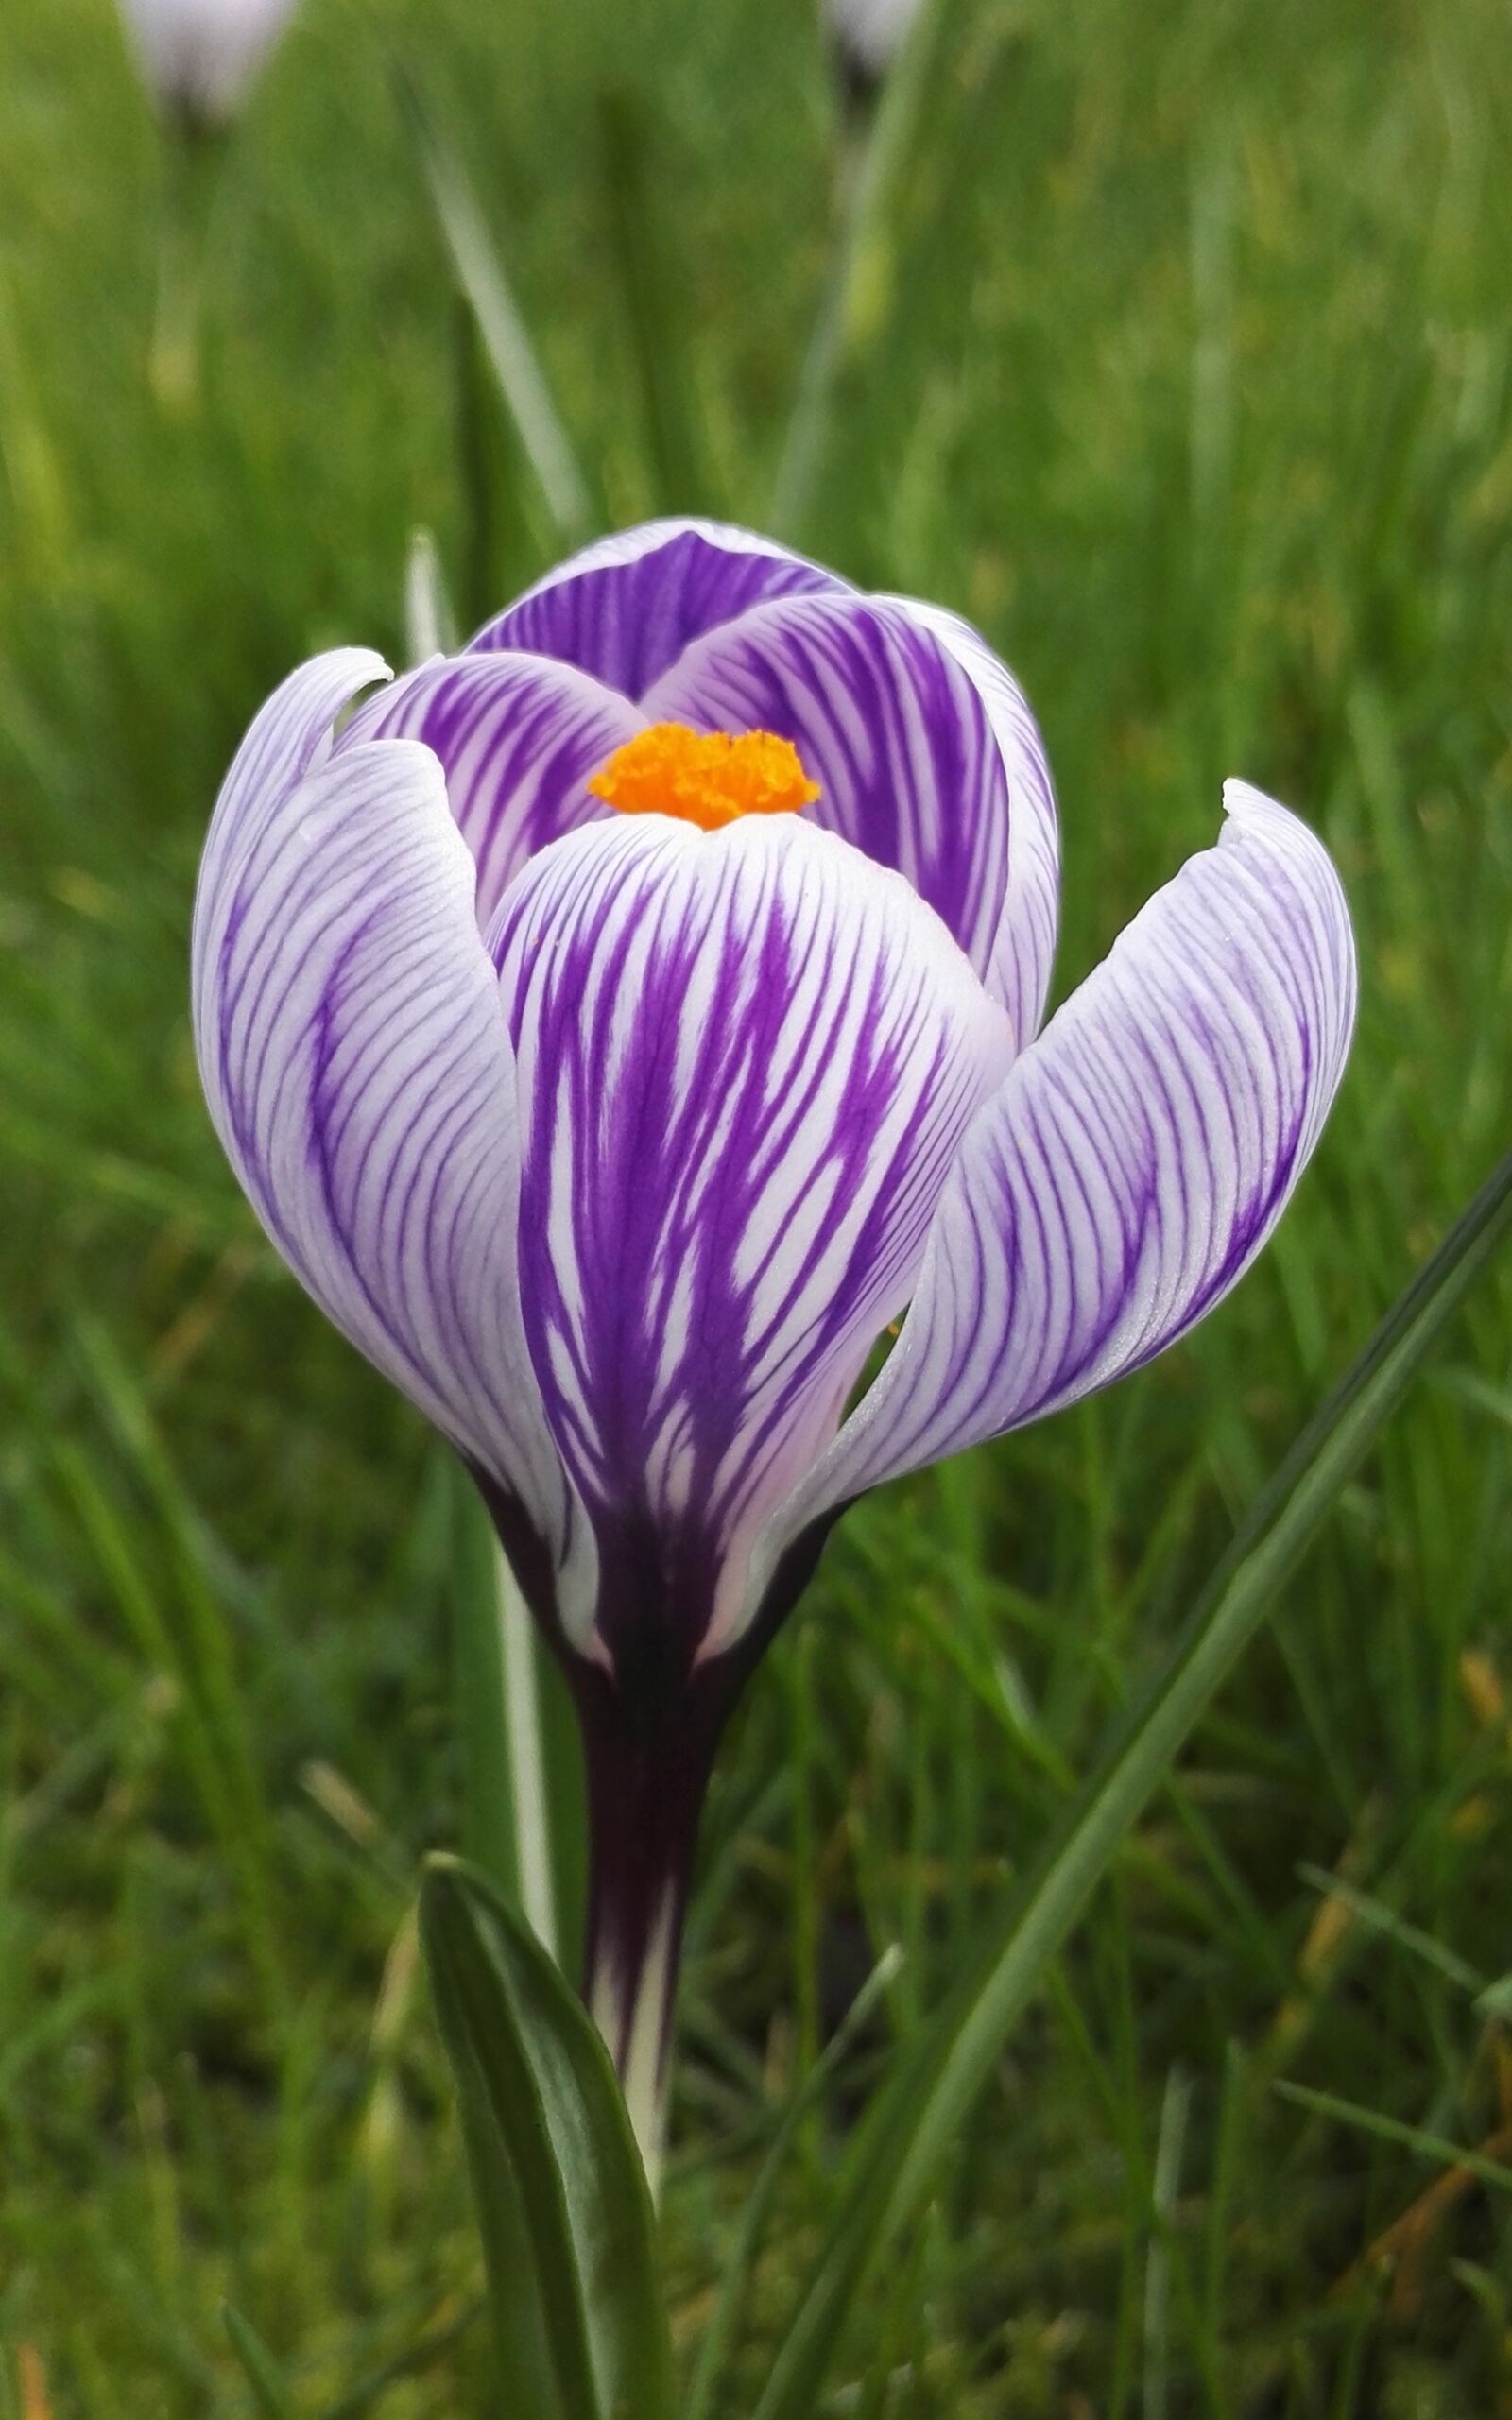 HUAWEI Honor 7 sample photo. Crocus, striped, spring photography